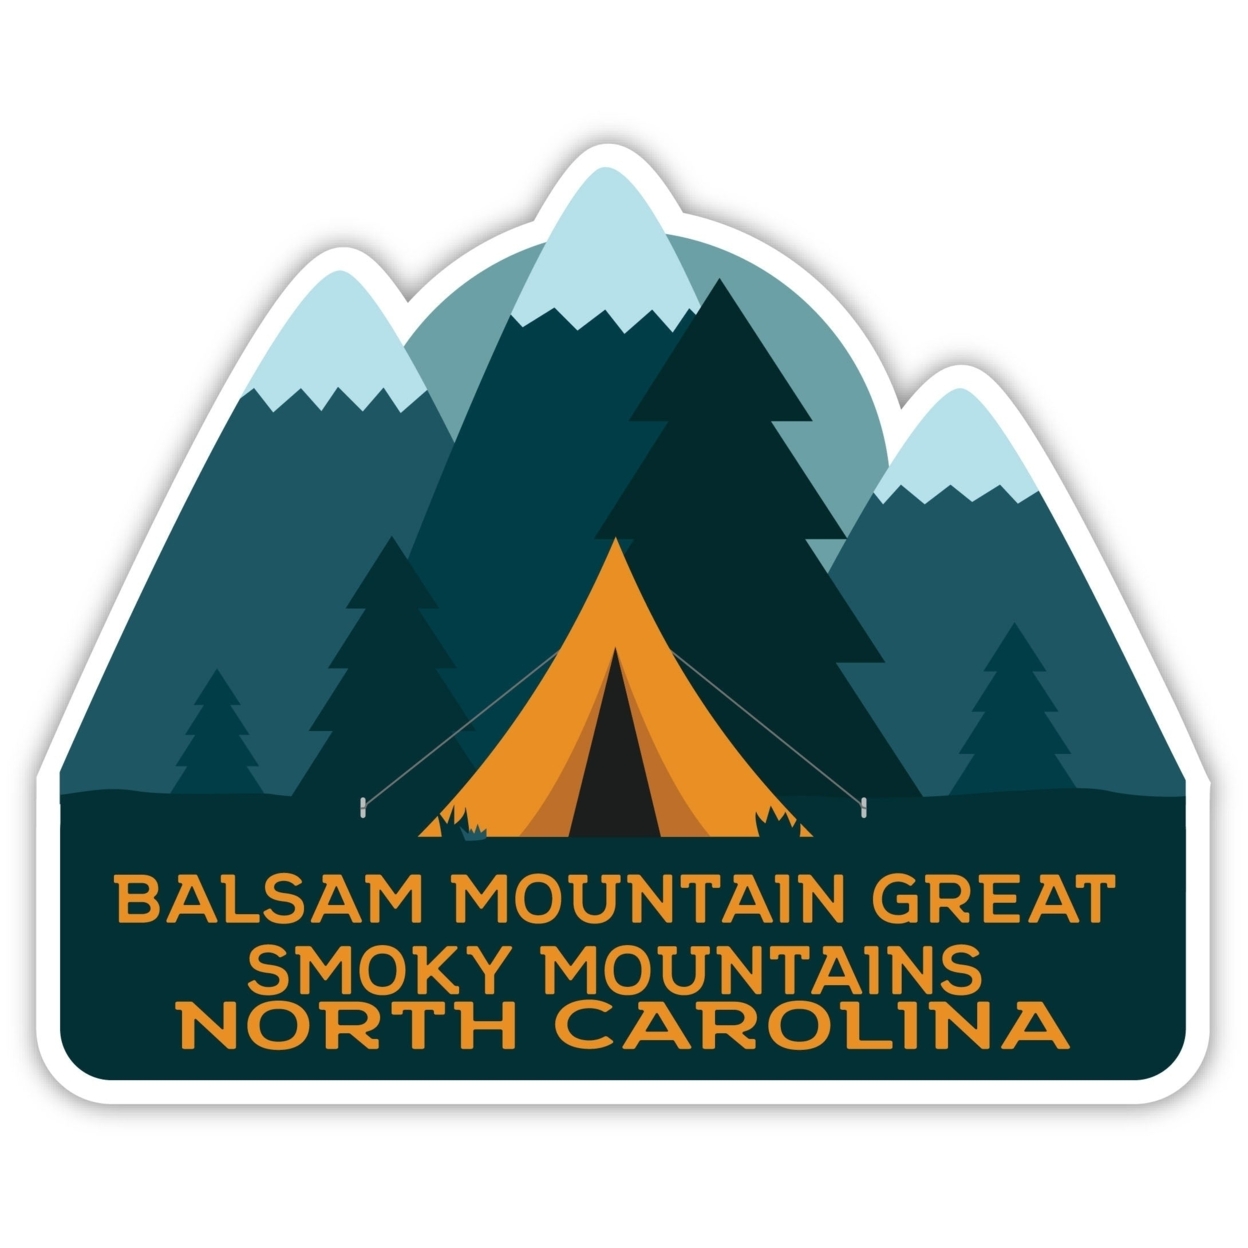 Balsam Mountain Great Smoky Mountains North Carolina Souvenir Decorative Stickers (Choose Theme And Size) - 4-Pack, 4-Inch, Tent